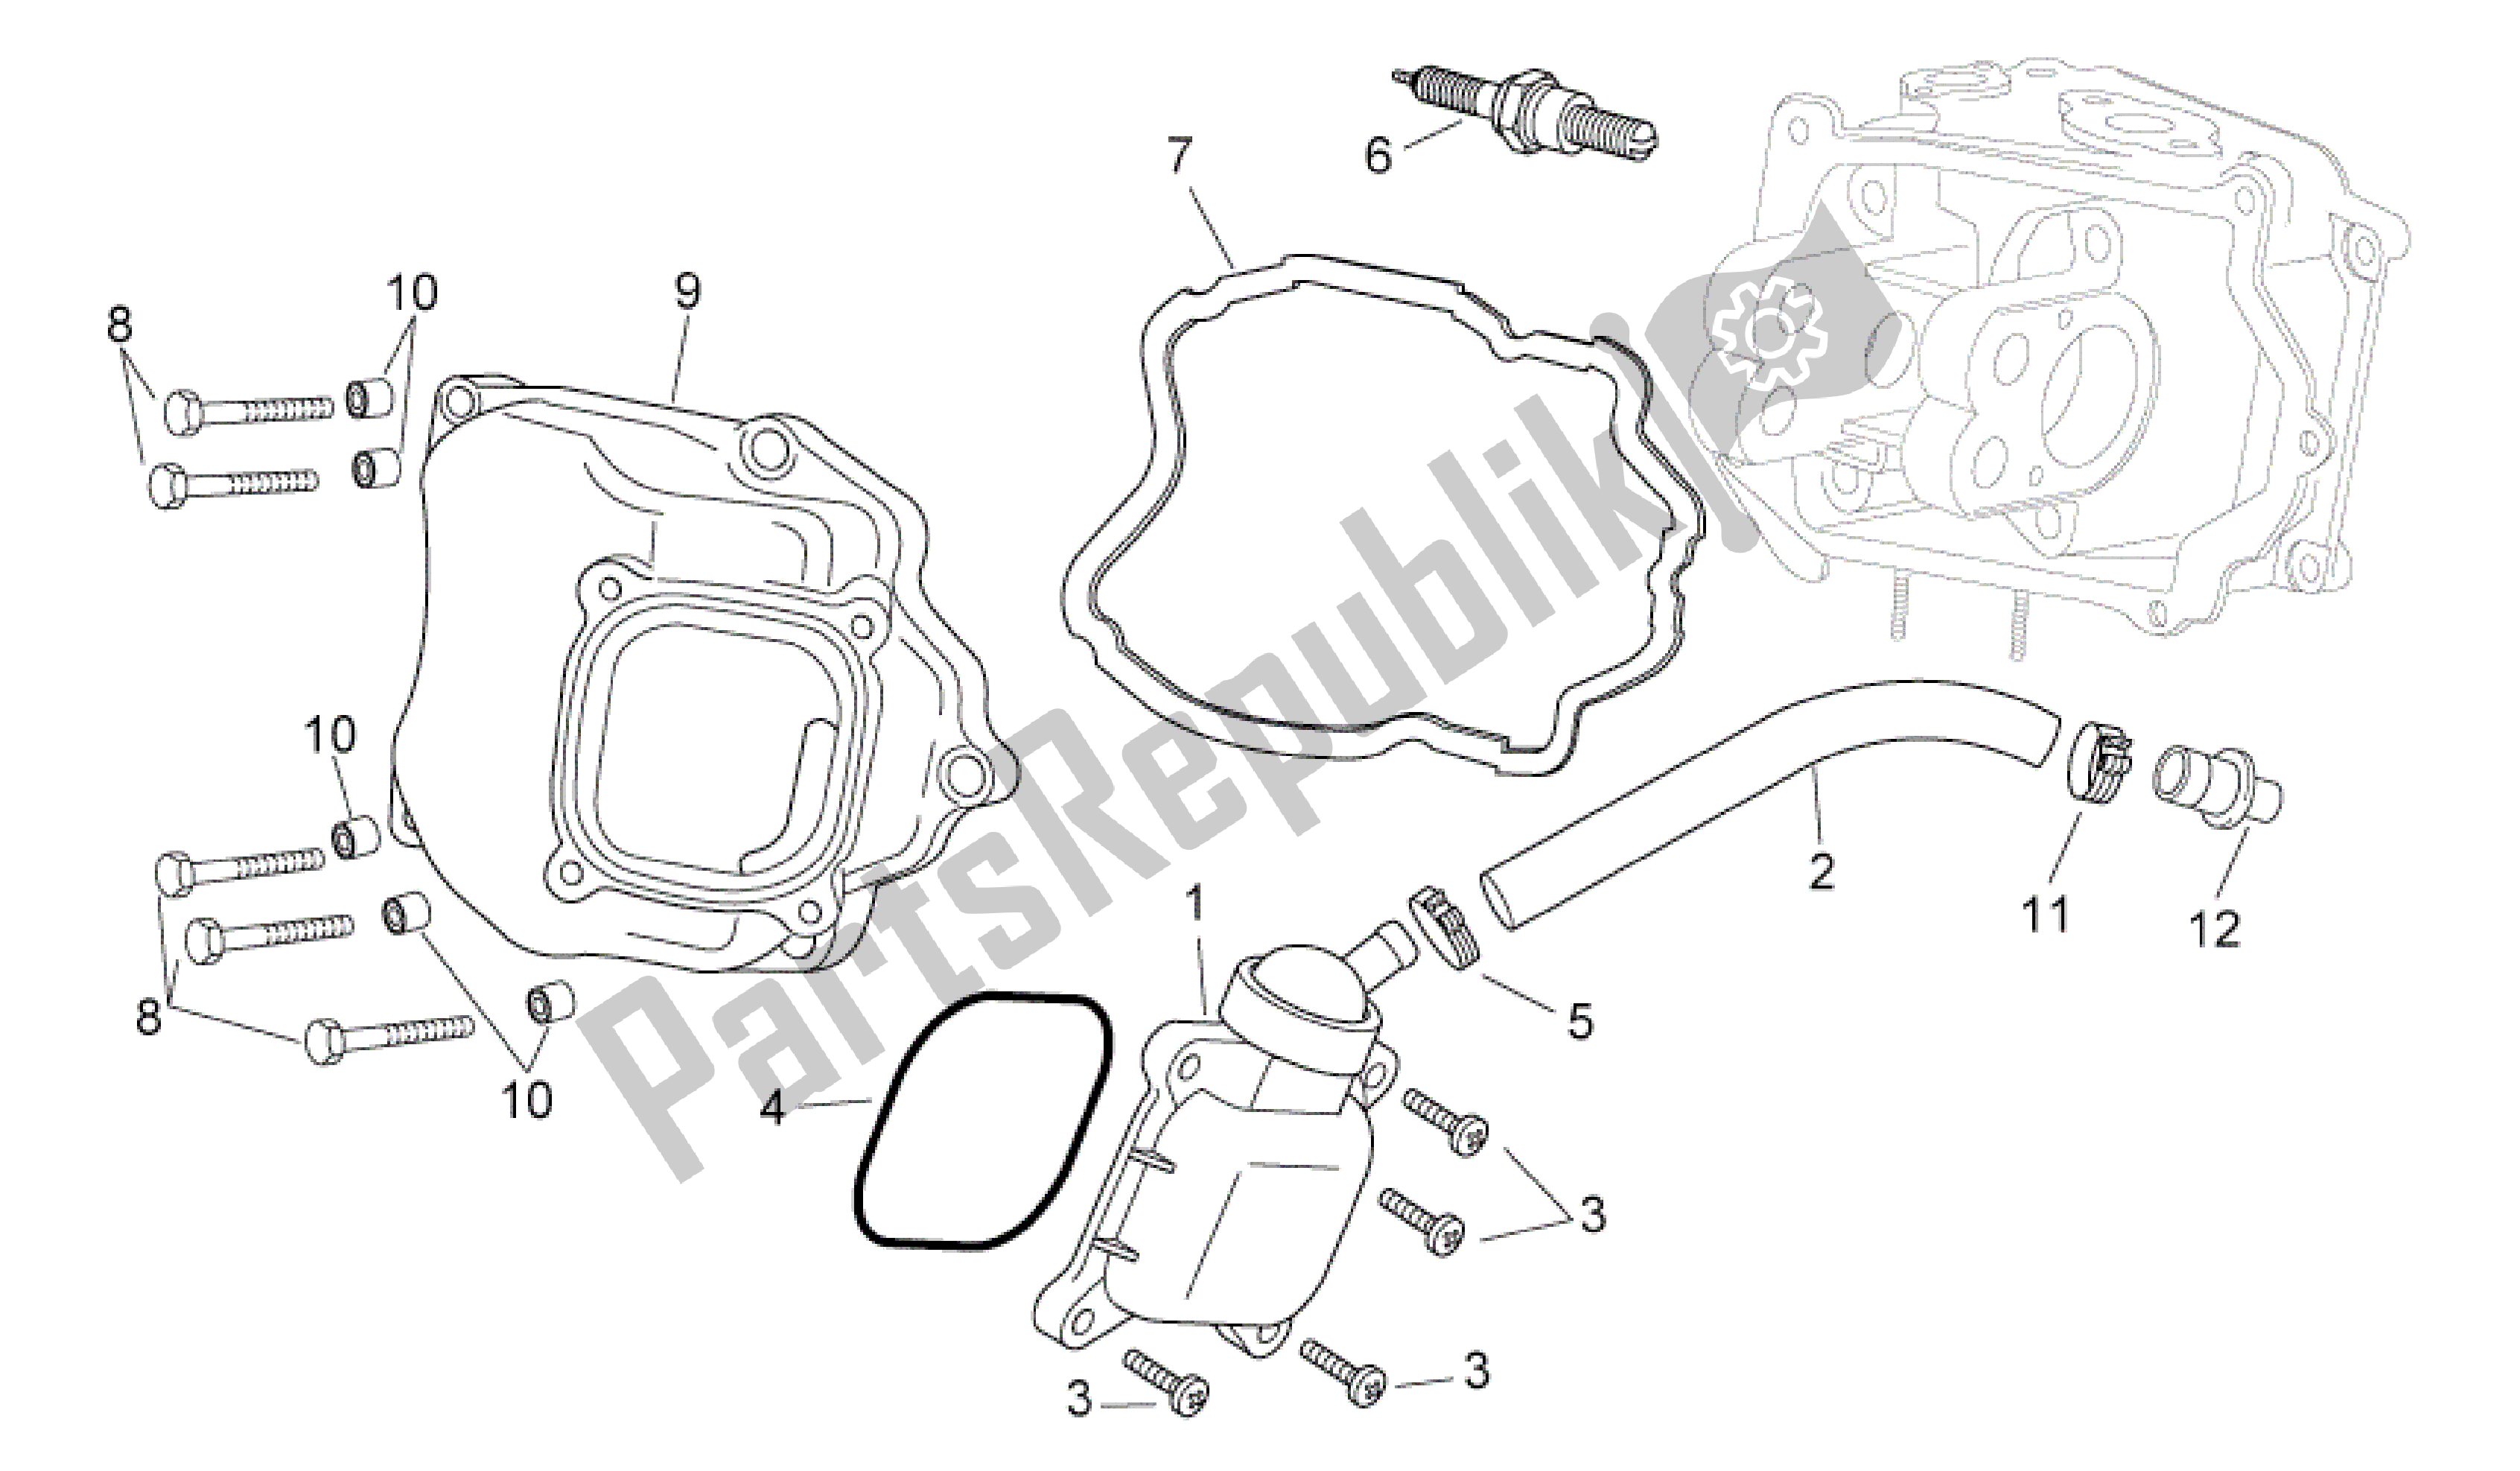 All parts for the Oil Breather Valve of the Aprilia Sport City 250 2008 - 2010